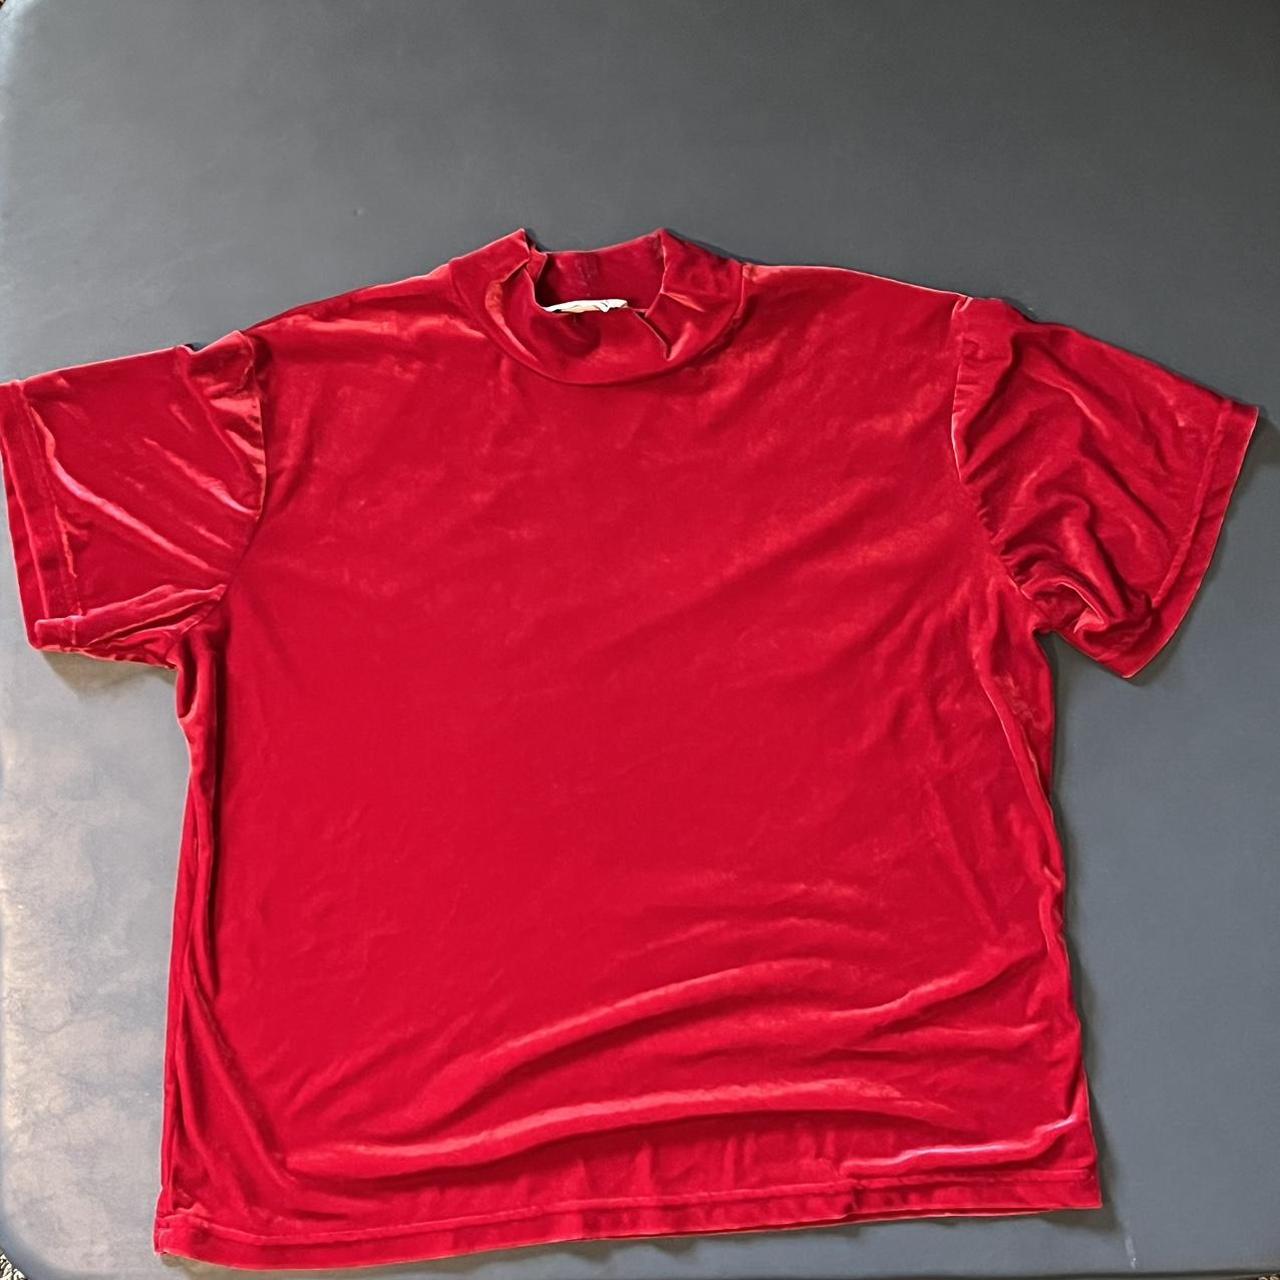 Impressions Women's Red T-shirt